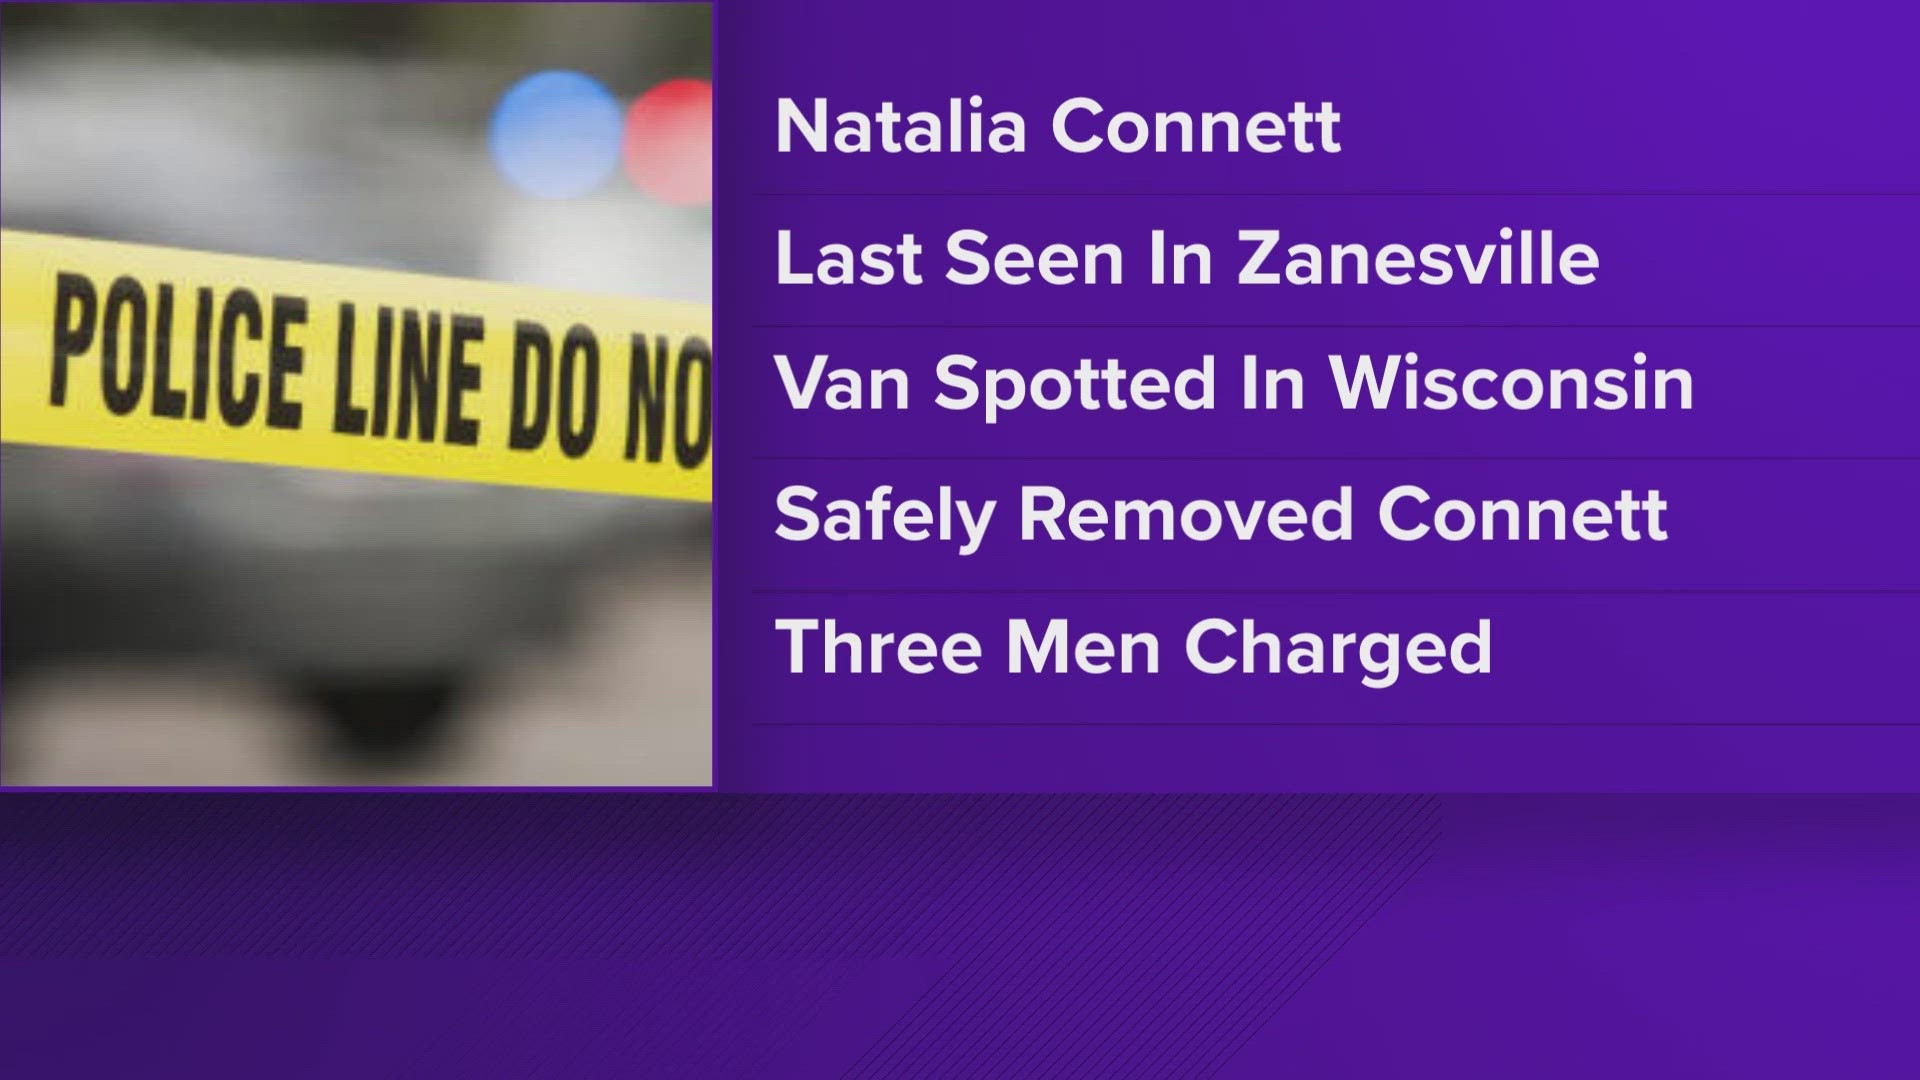 All three people were reportedly from South Dakota.